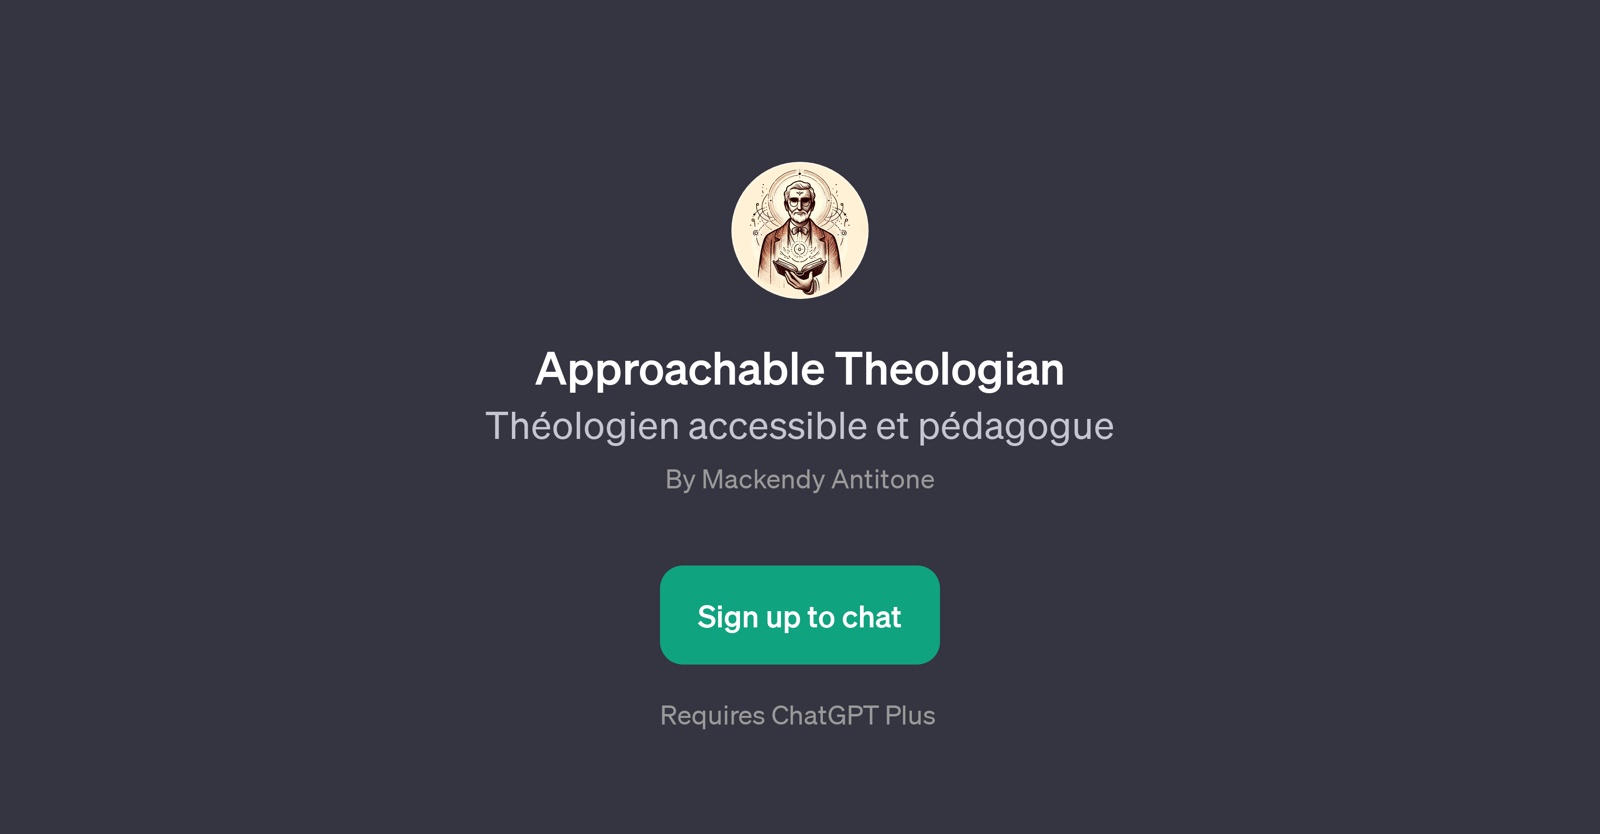 Approachable Theologian website